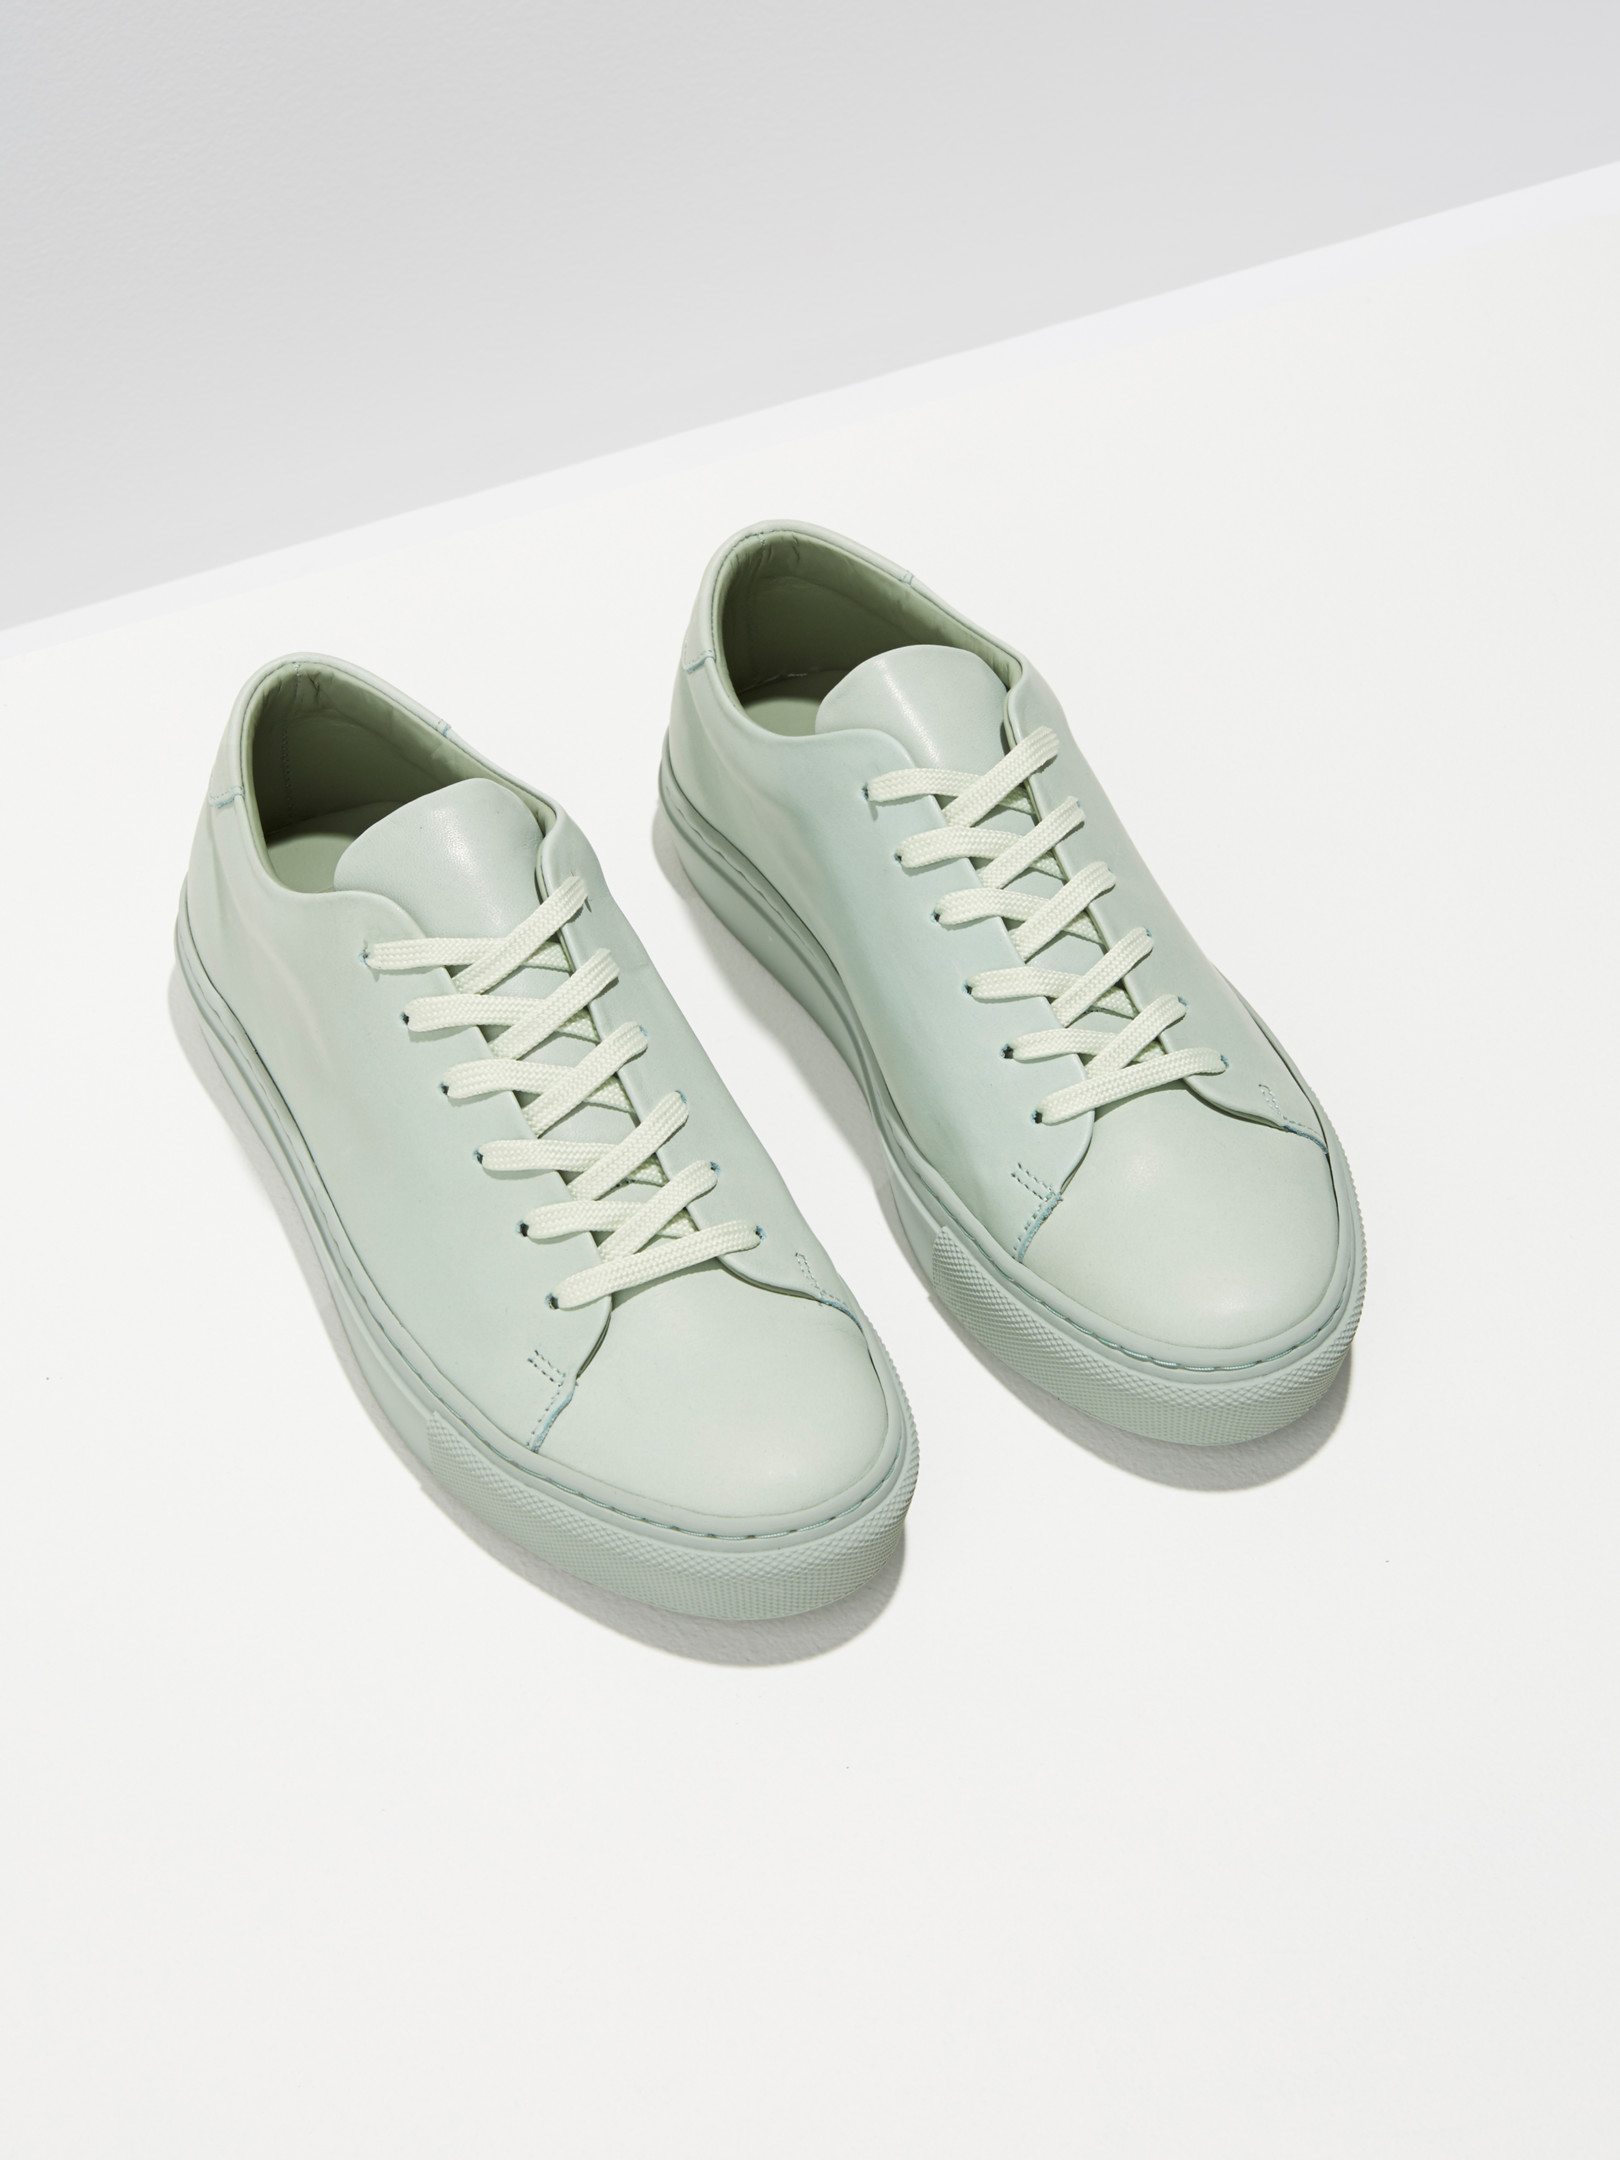 Frank + Oak Launches Womens Shoes and They've Got All the Basics You've ...